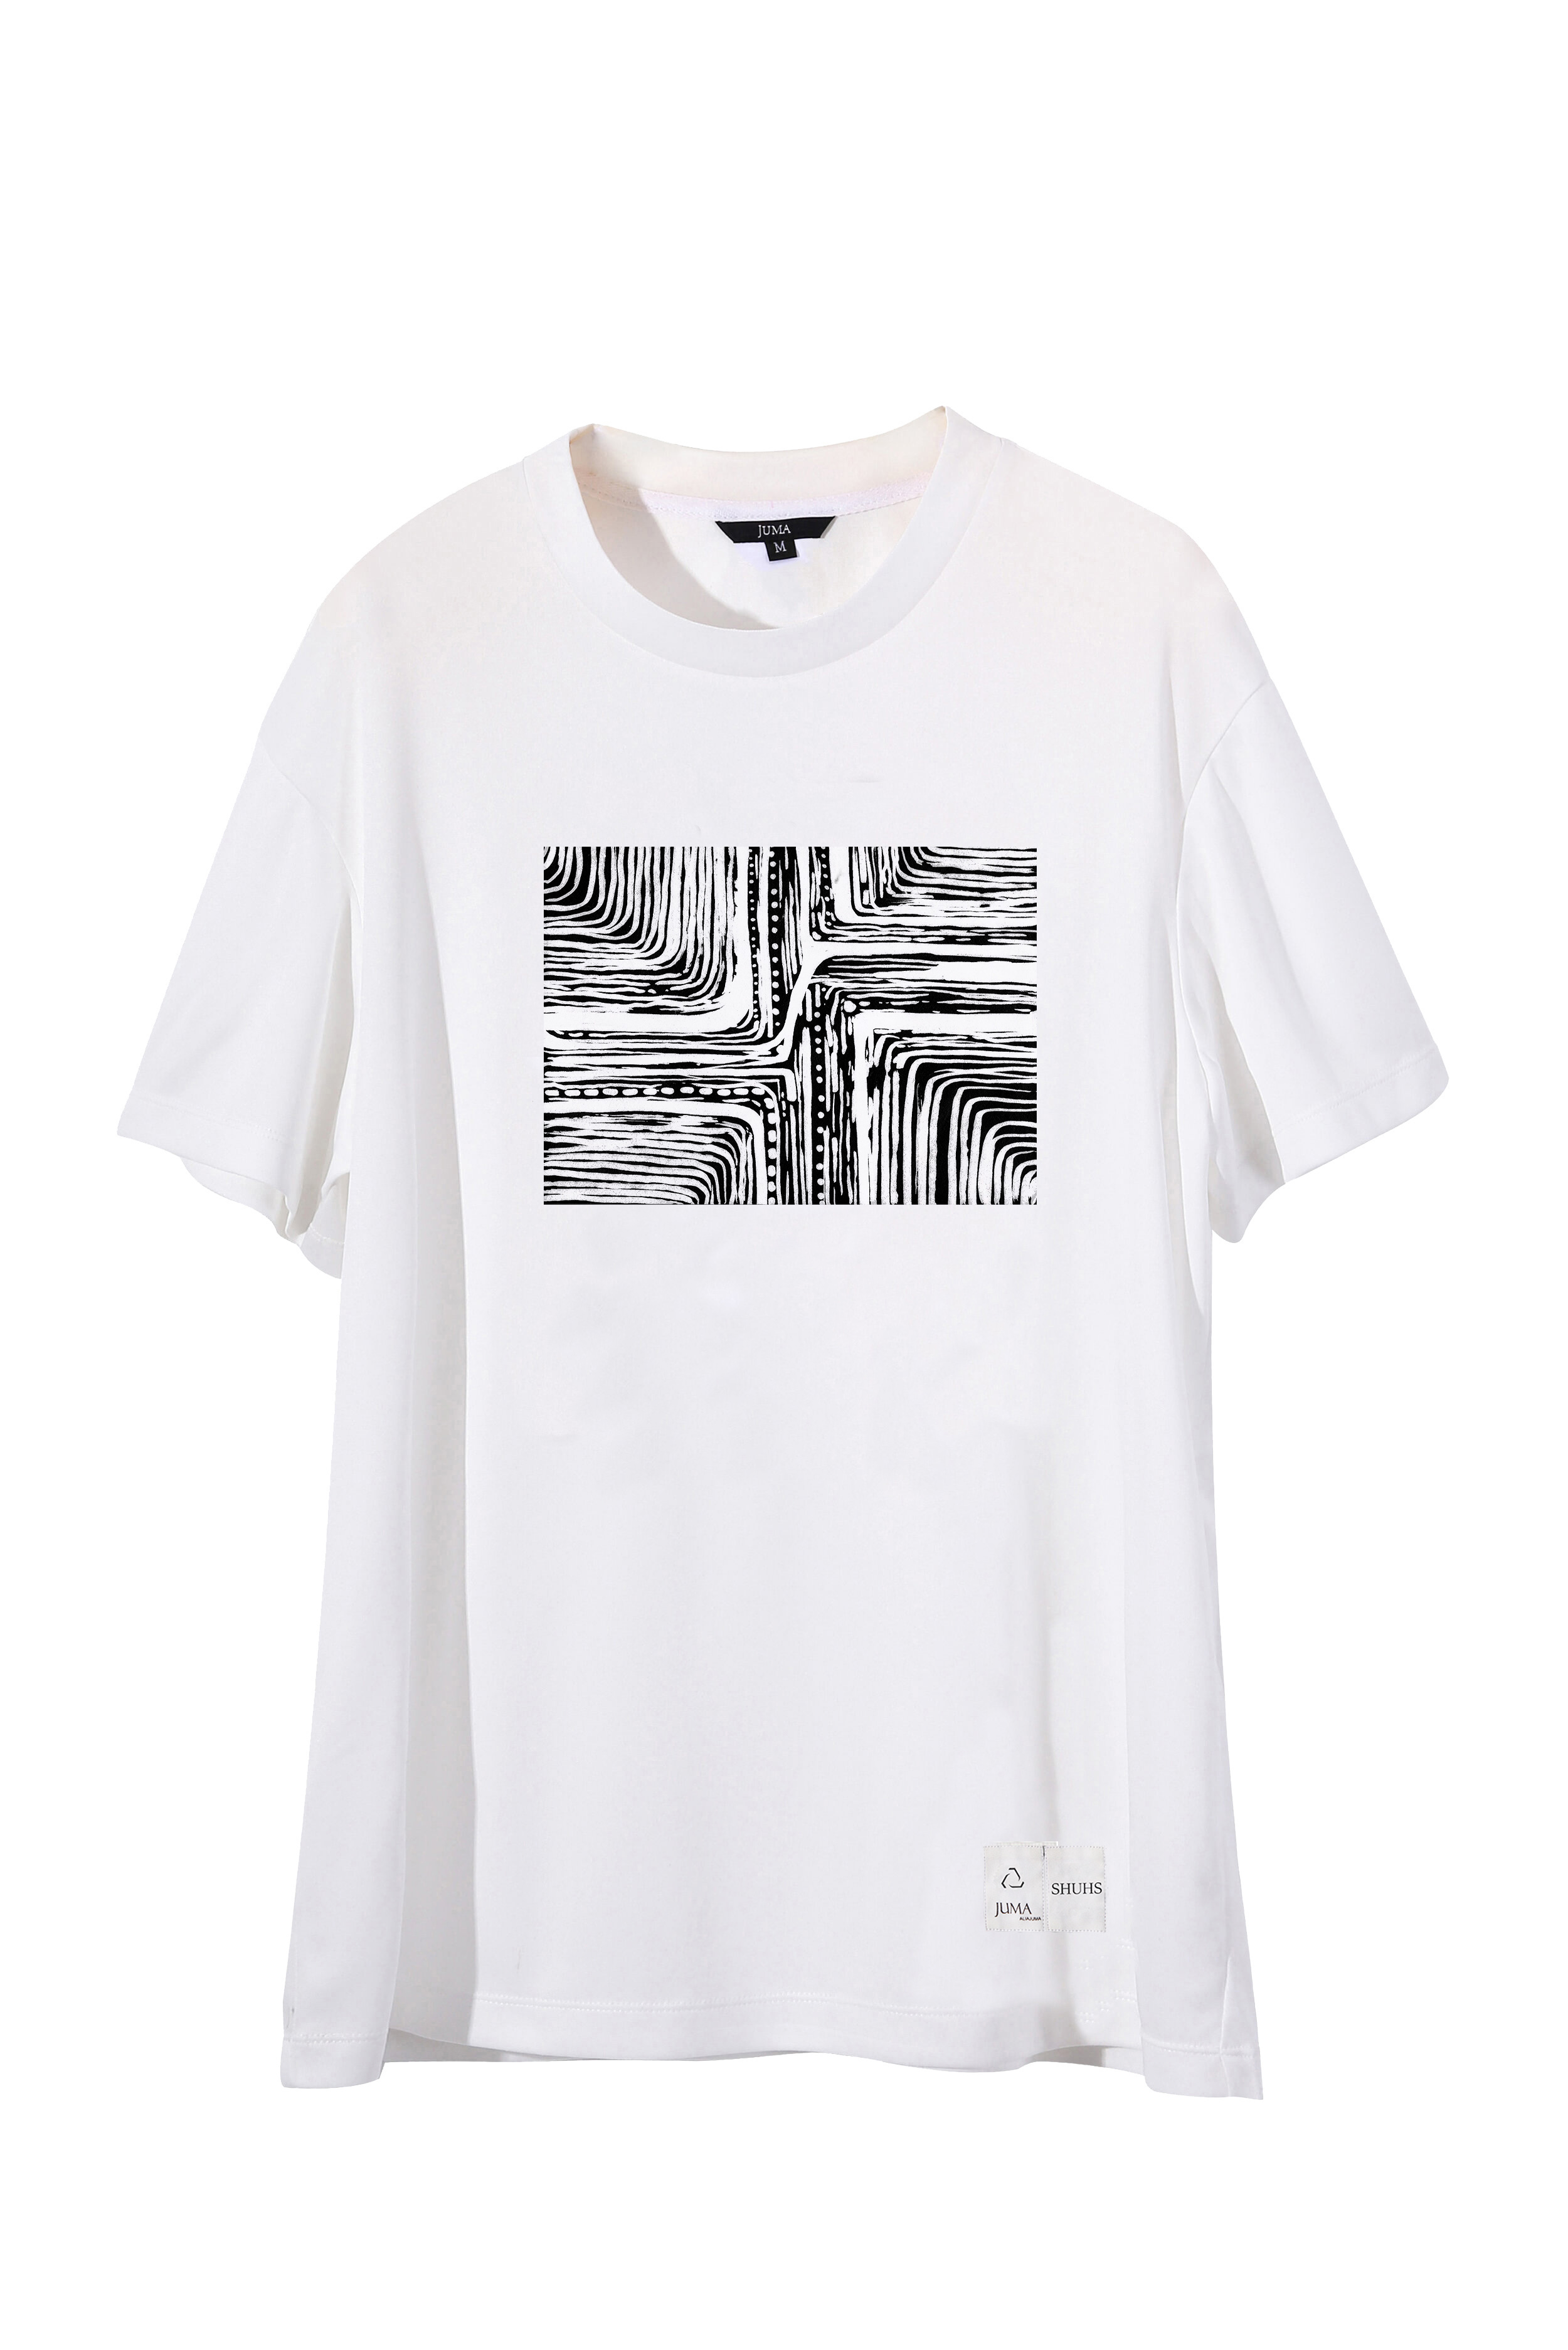 Recharge 印花 3 件 T 恤 - 4 个再生水瓶 - 奶油｜Recharge Print 2 T-Shirt - 3 Recycled Water Bottles-Cream